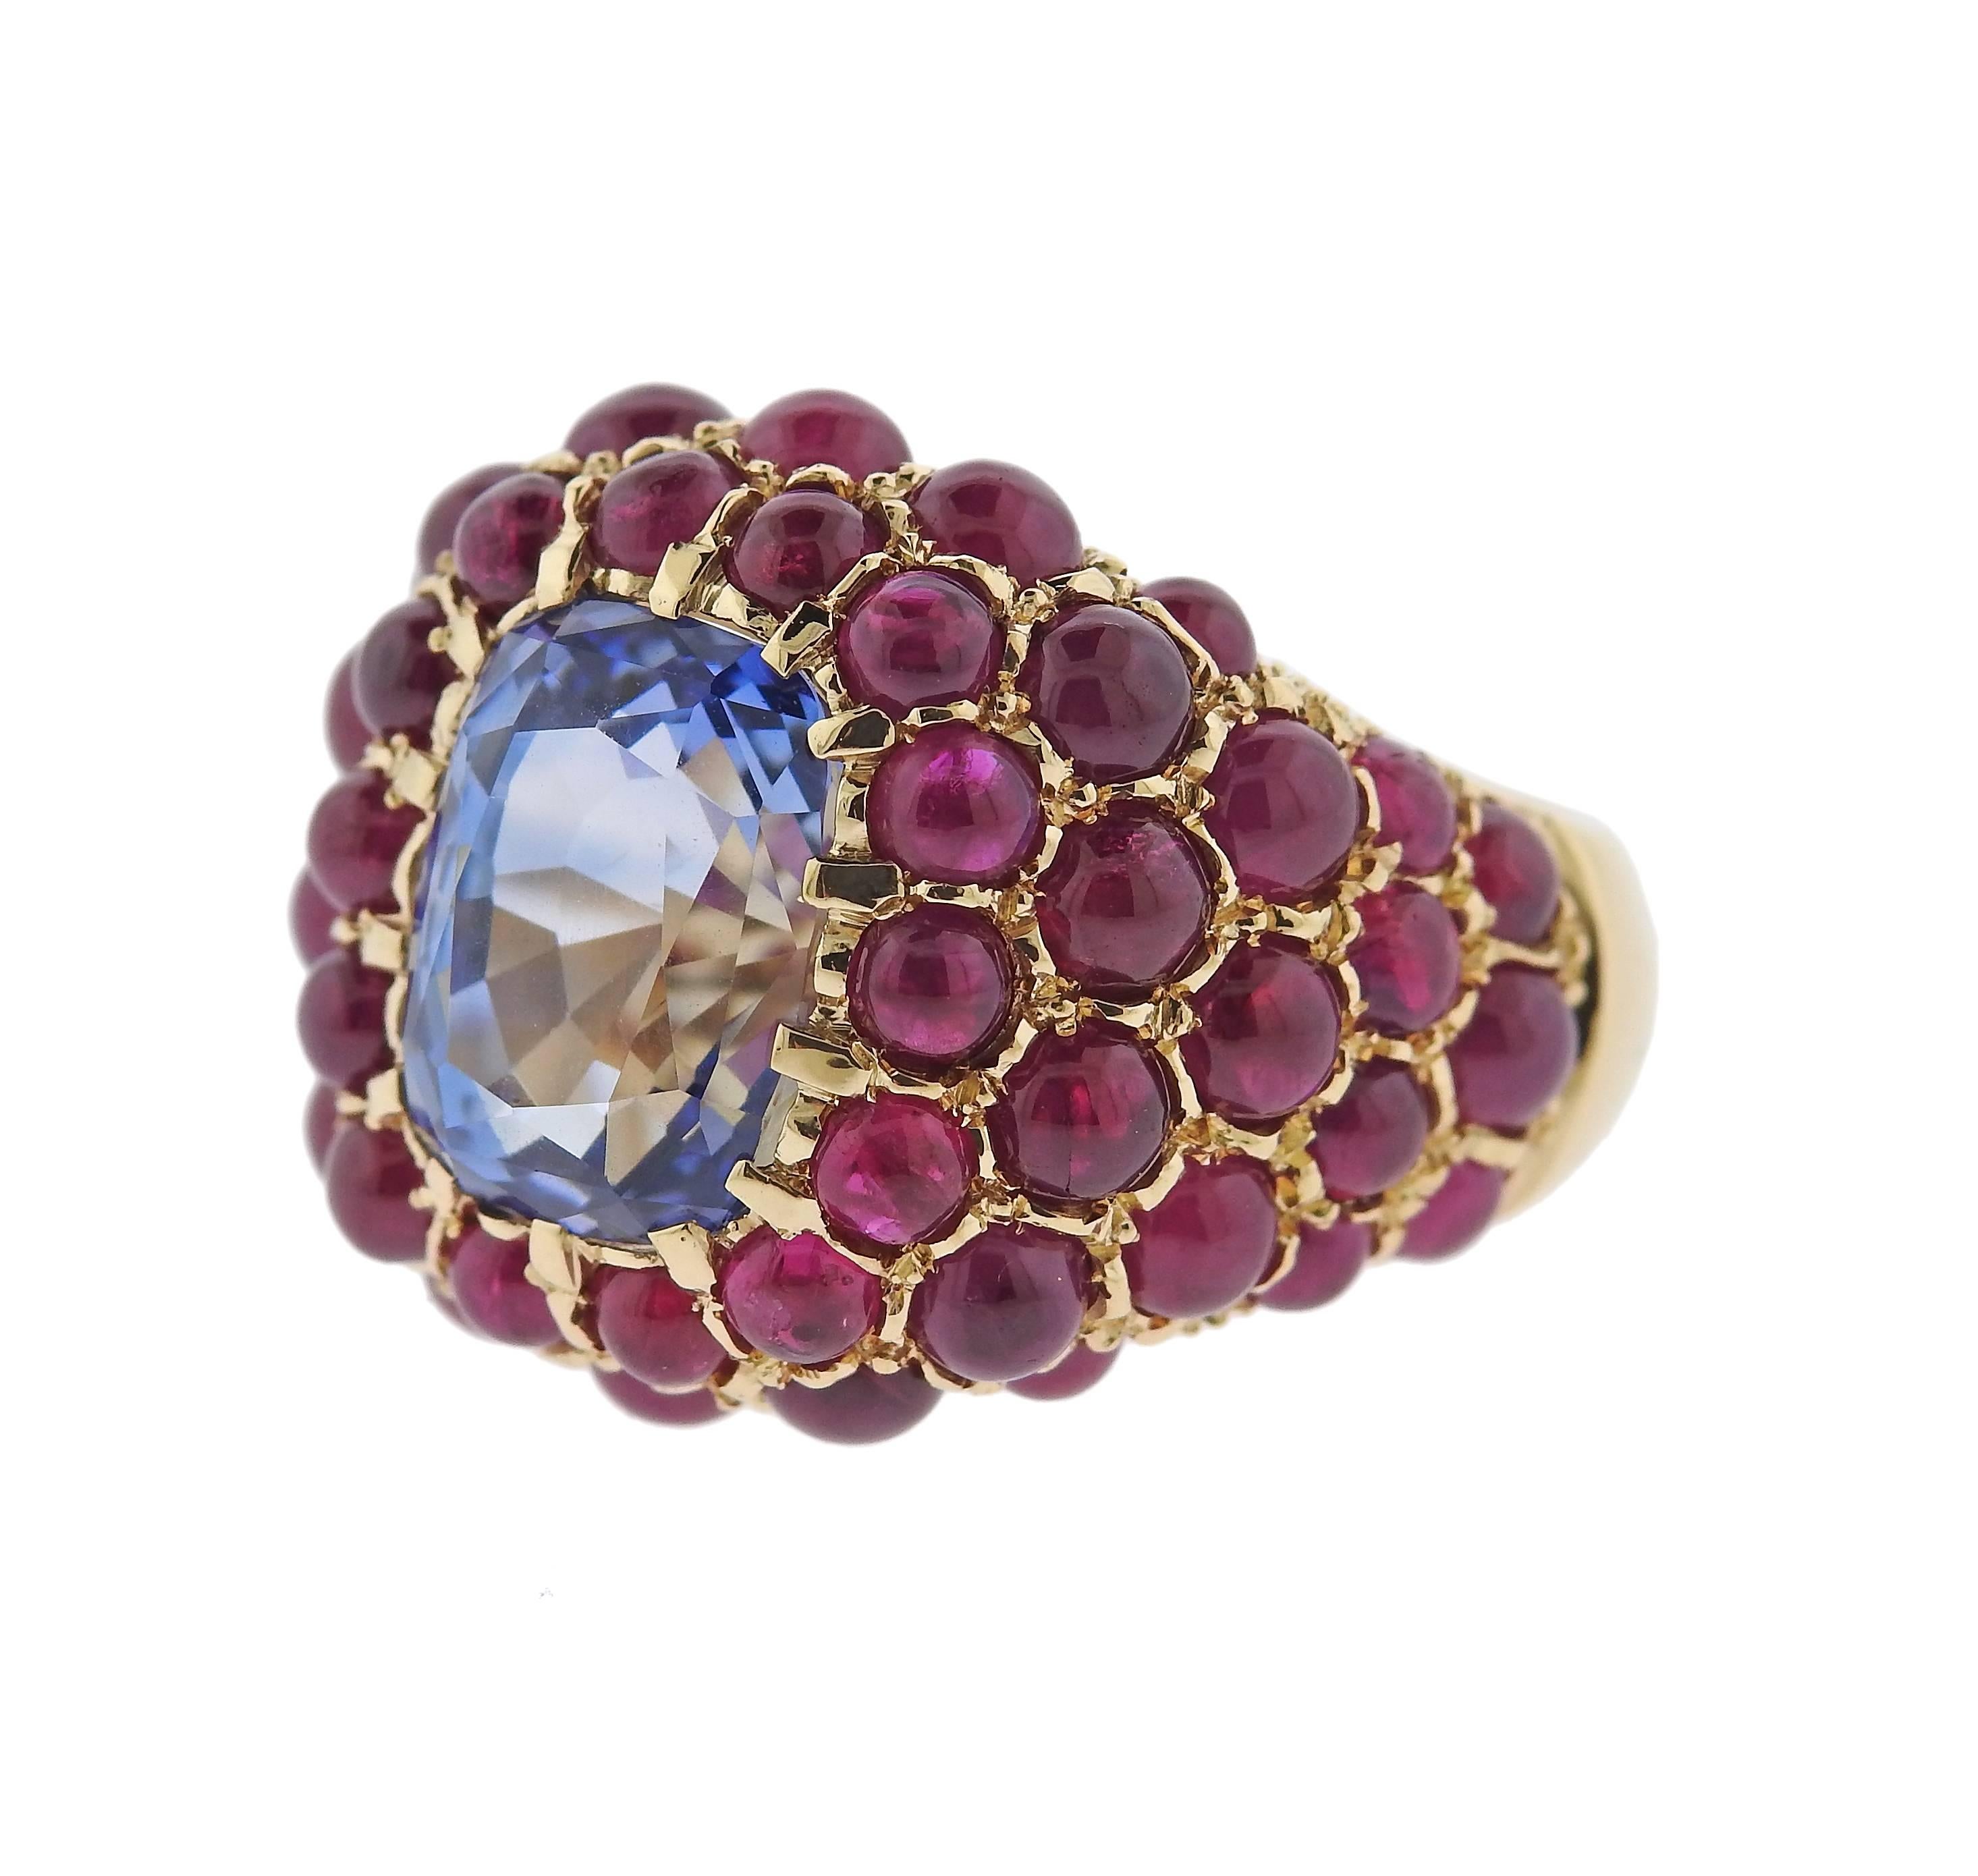 Impressive 18k yellow gold ring, crafted by Verdura, featuring an approximately 6.80ct blue sapphire in the center, surrounded with ruby cabochons.  Ring is a size - 7, ring top is 20mm wide. Marked: Verdura, 18k. Weight - 15.9 grams